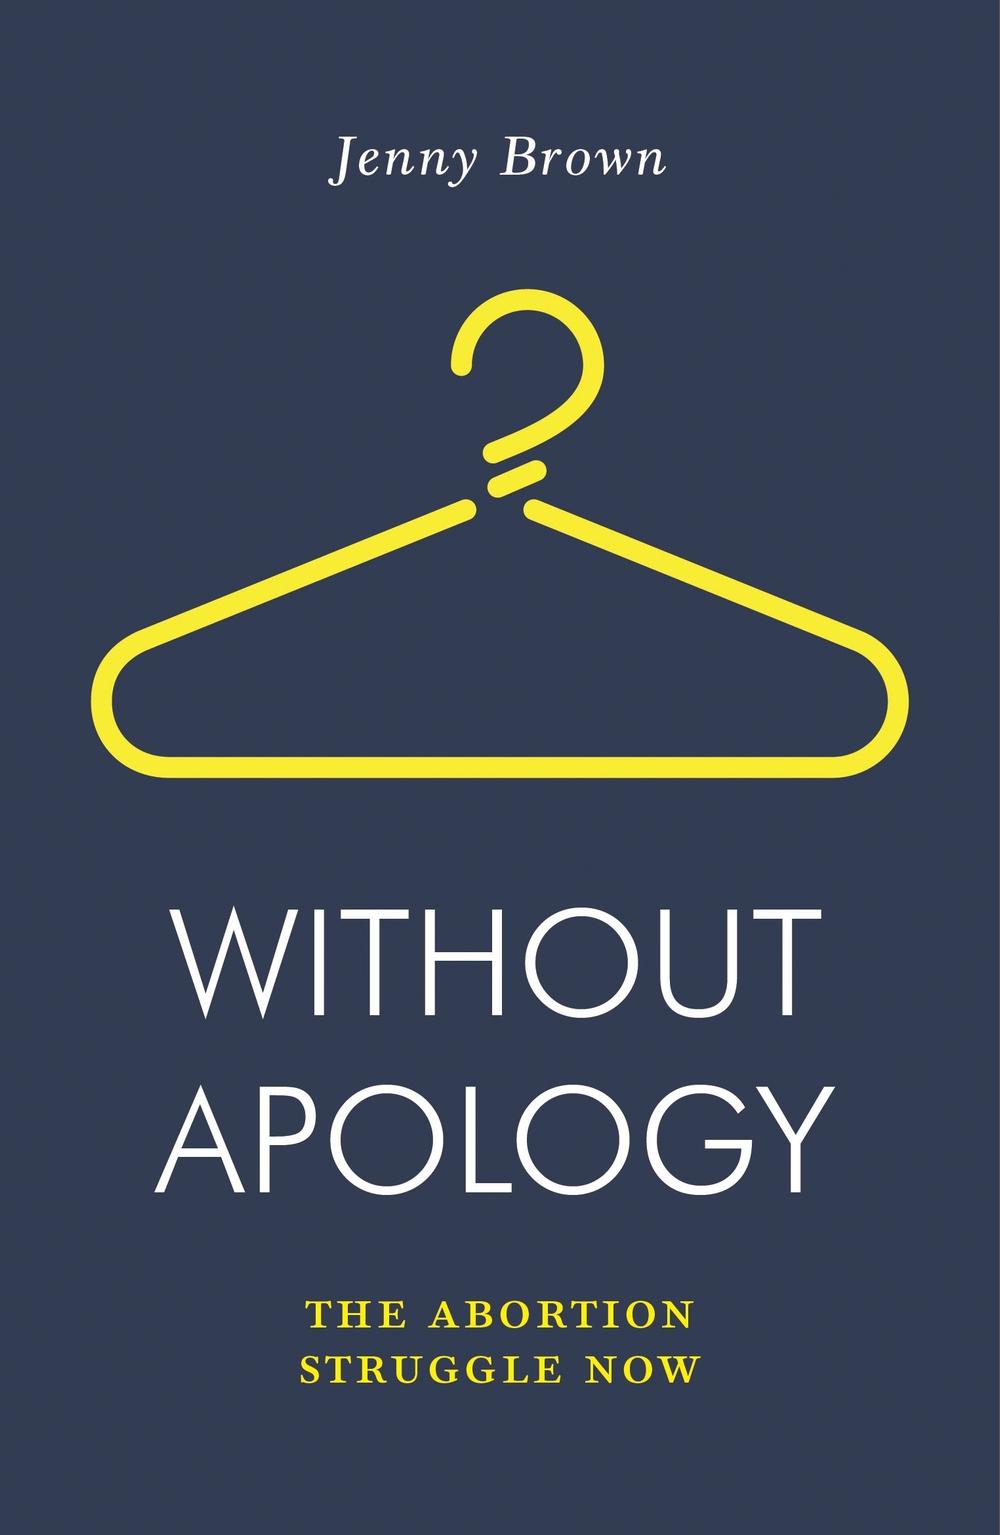 Without Apology - Jenny Brown